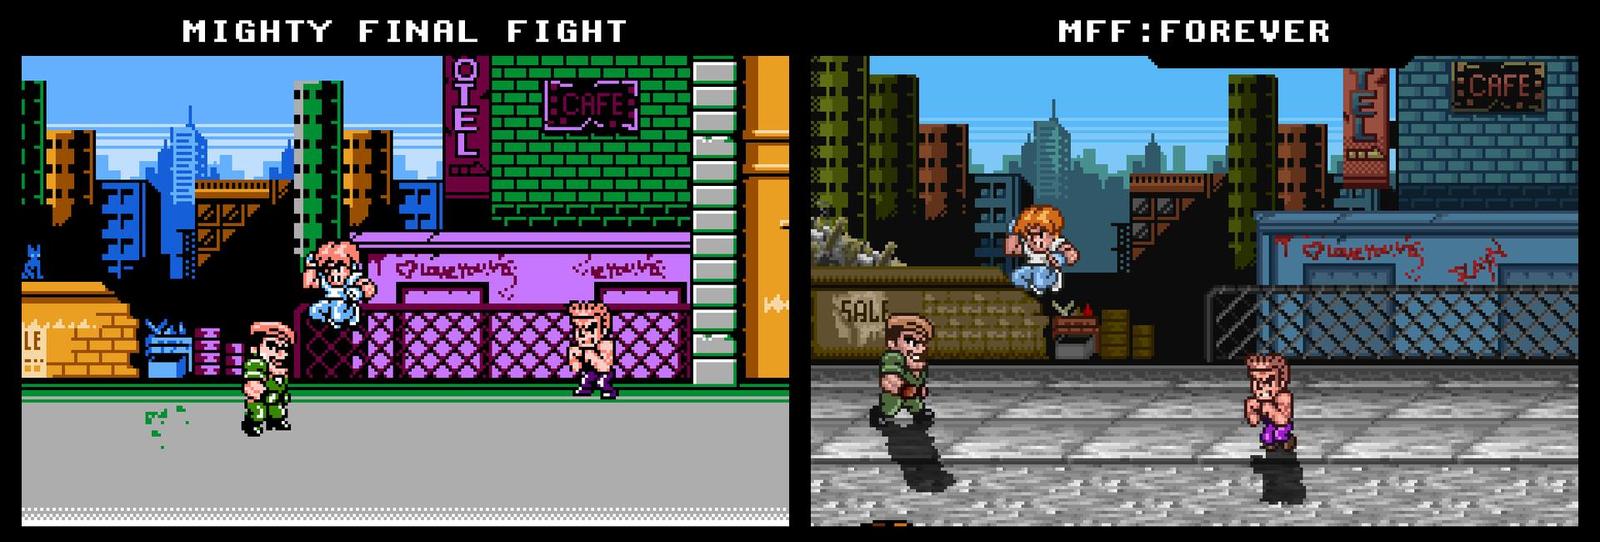 Mighty Final Fight Forever